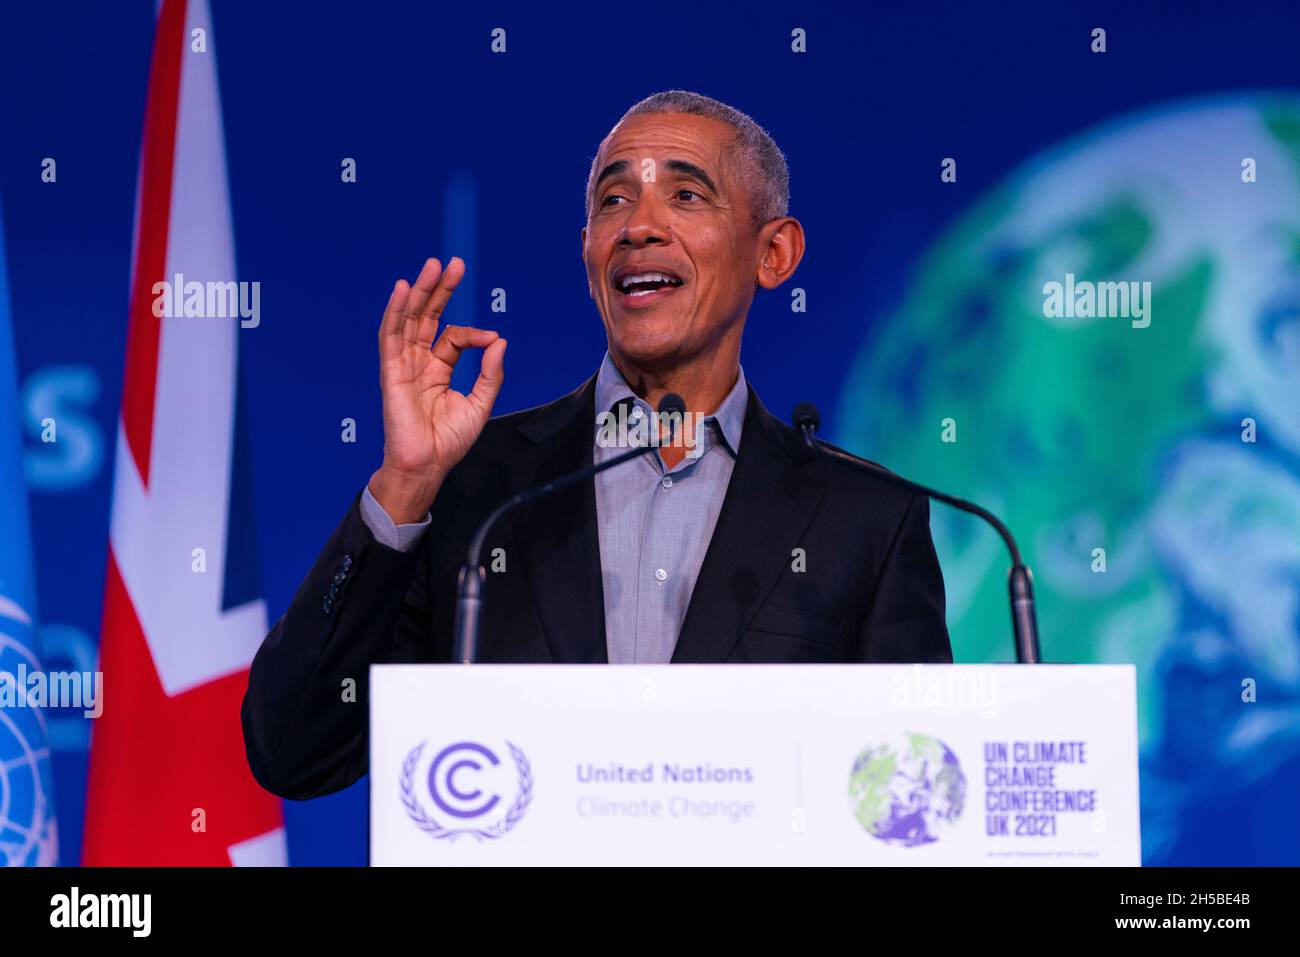 Glasgow, Scotland, UK. 8th November 2021. Former US president Barack Obama makes speech to delegates at the UN Climate change conference COP26 in Glasgow today.   Iain Masterton/Alamy Live News. Stock Photo